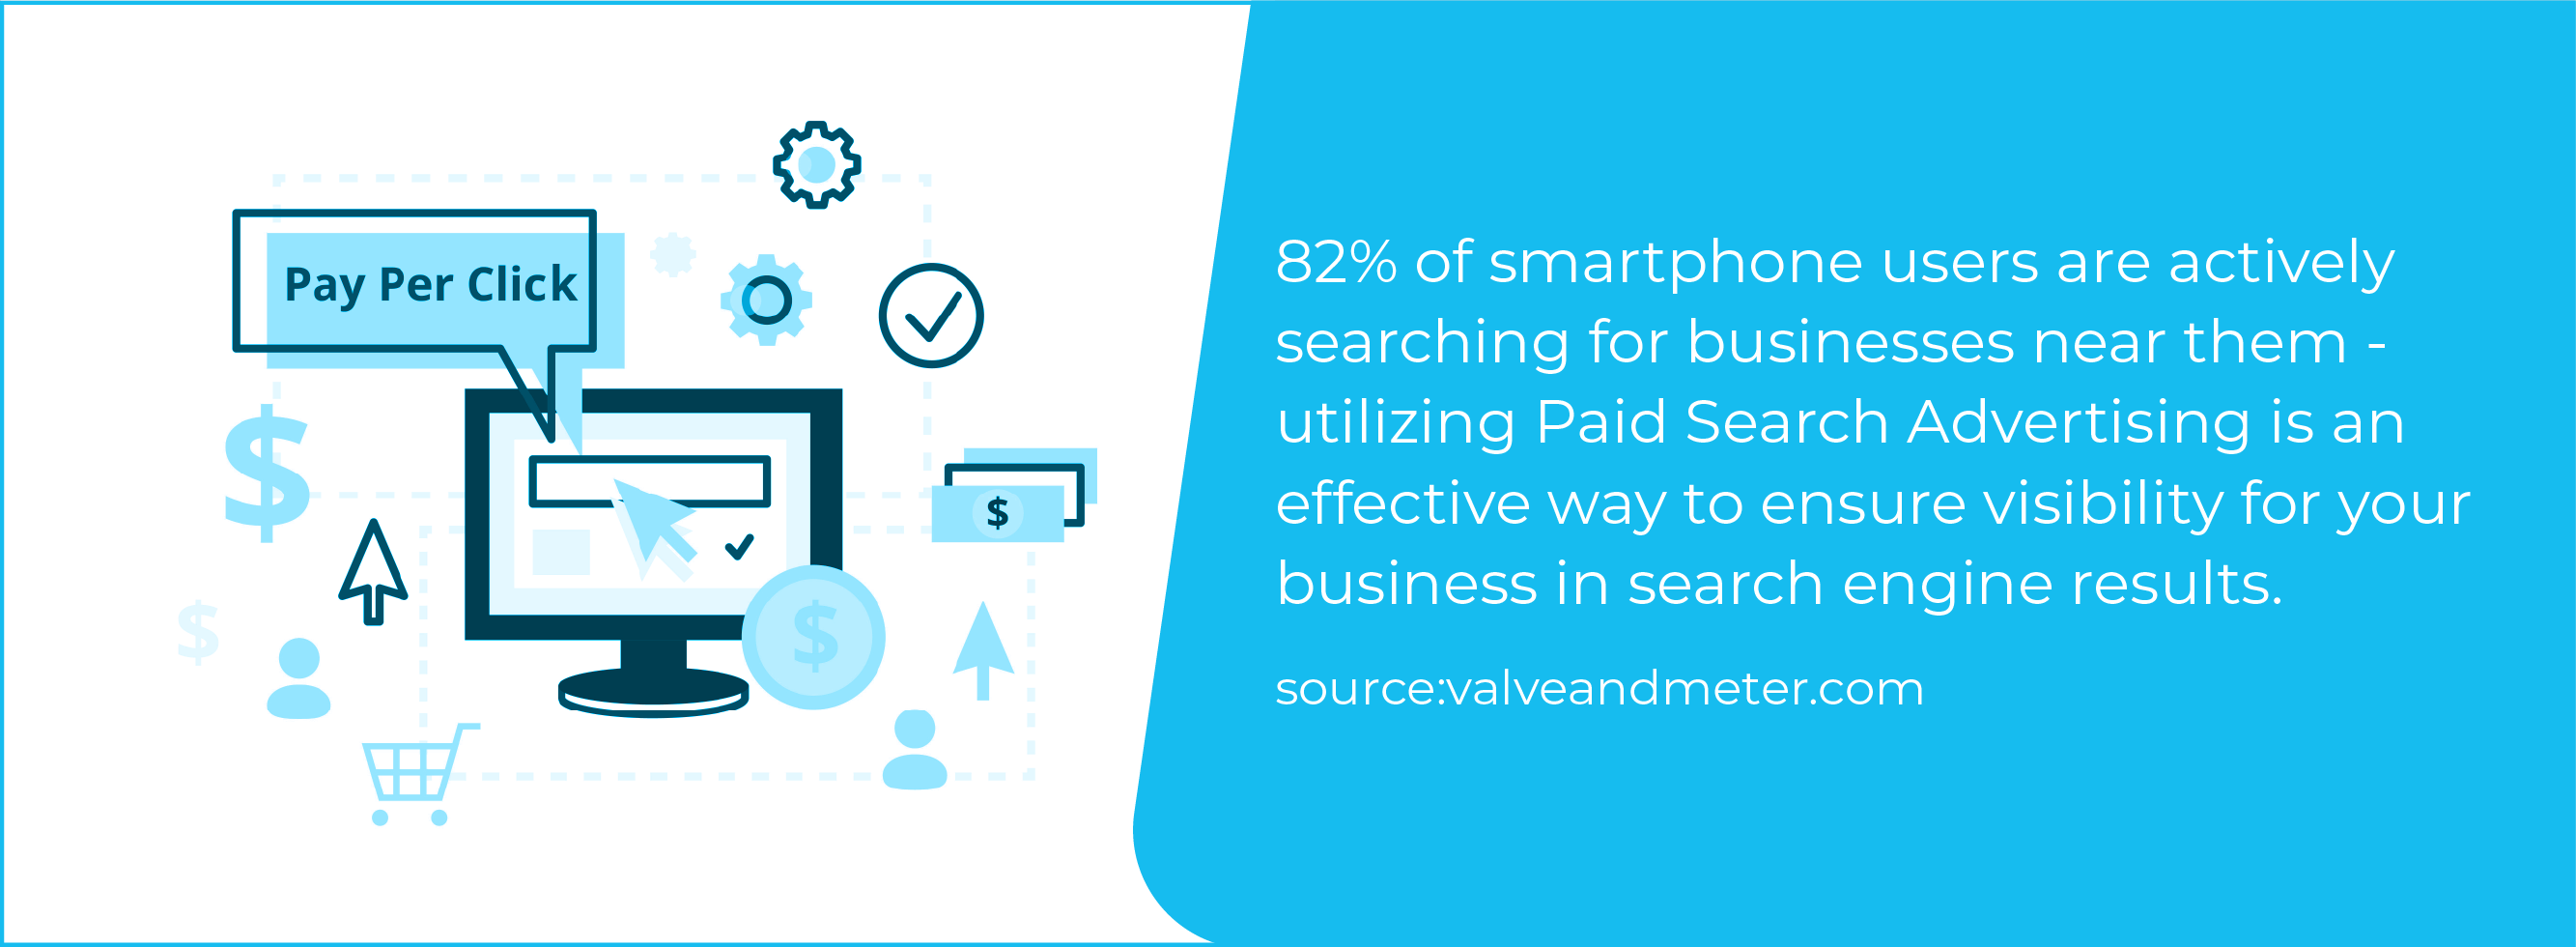 82% of smartphone users are actively searching for businesses near them.